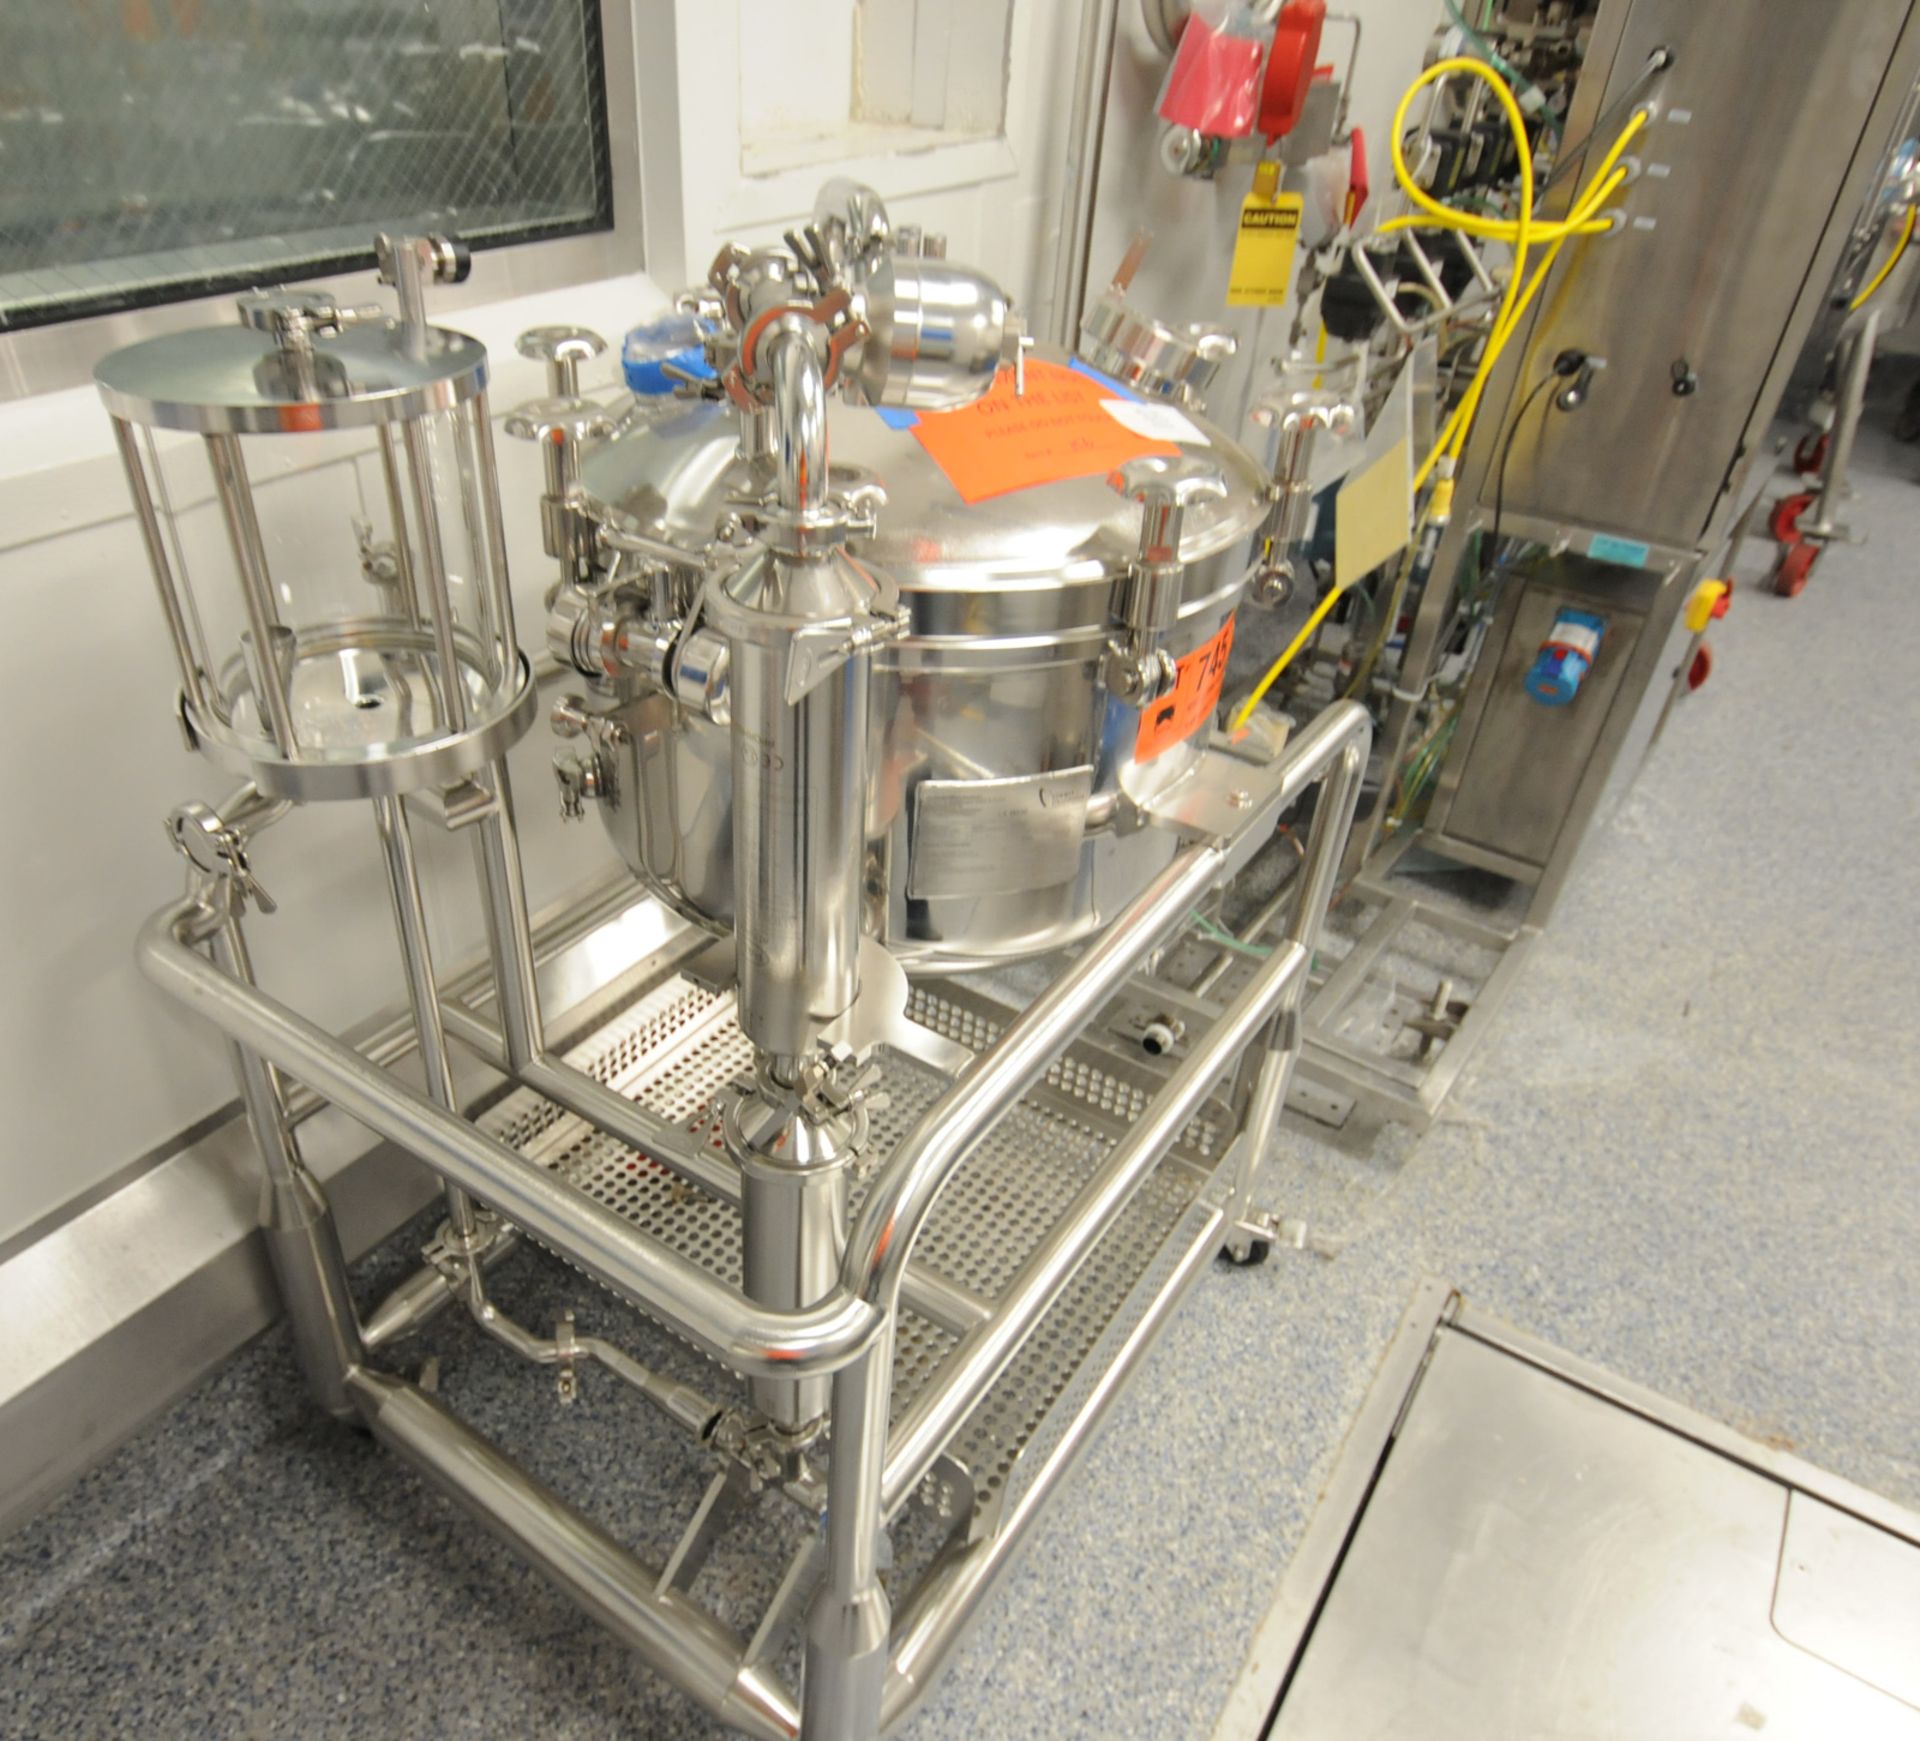 SOMMER & STRASSBURGER (2013) RAUM/CHAMBER STAINLESS STEEL CART MOUNTED PORTABLE REACTOR VESSEL - Image 4 of 6